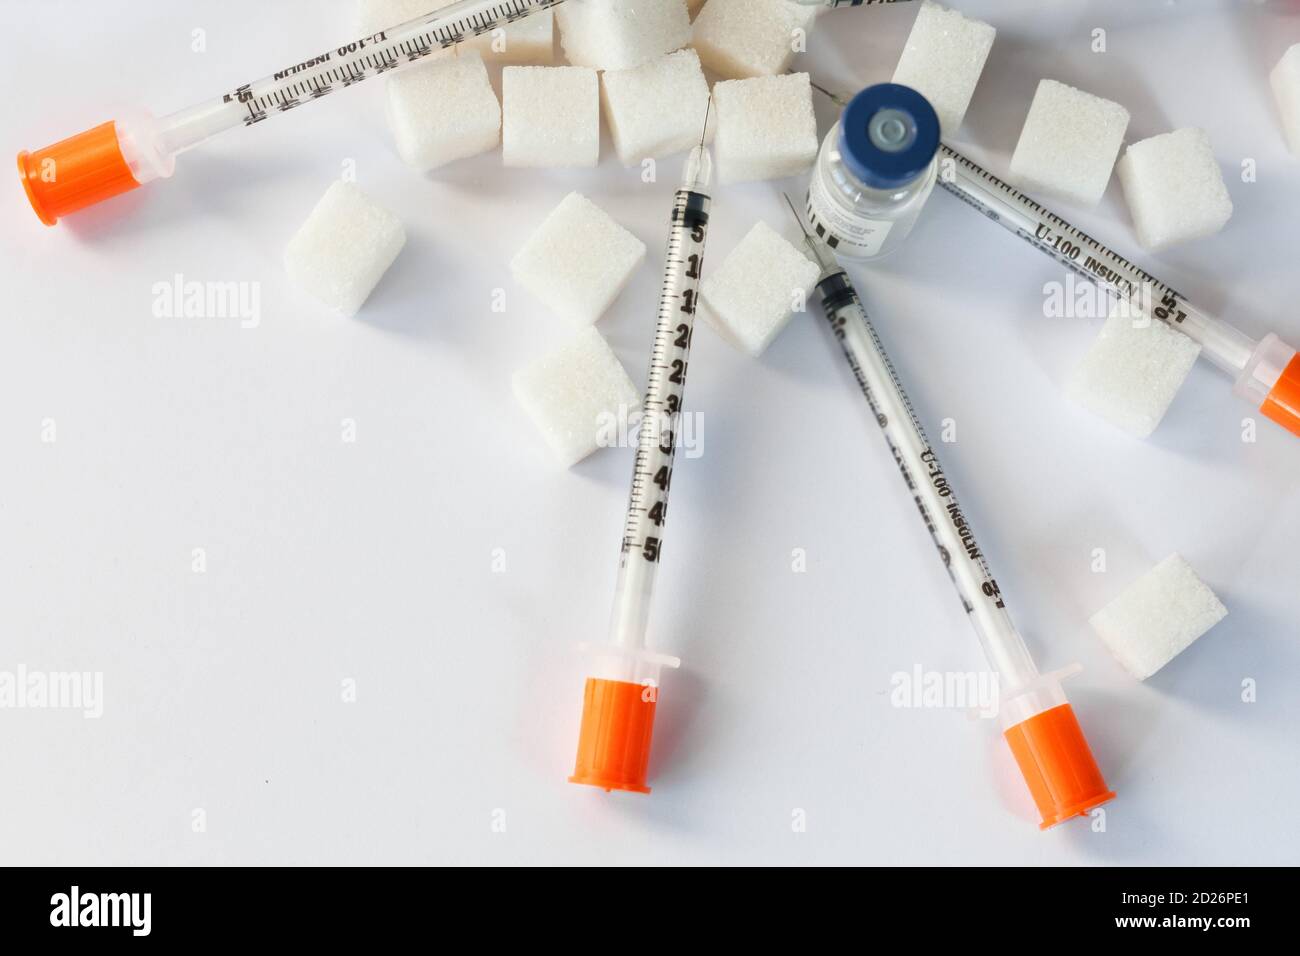 Sugar addiction, insulin resistance, unhealthy diet, sugar cubes pyramid, bottles of insulin and syringe for vaccinationon white background, diabetes Stock Photo